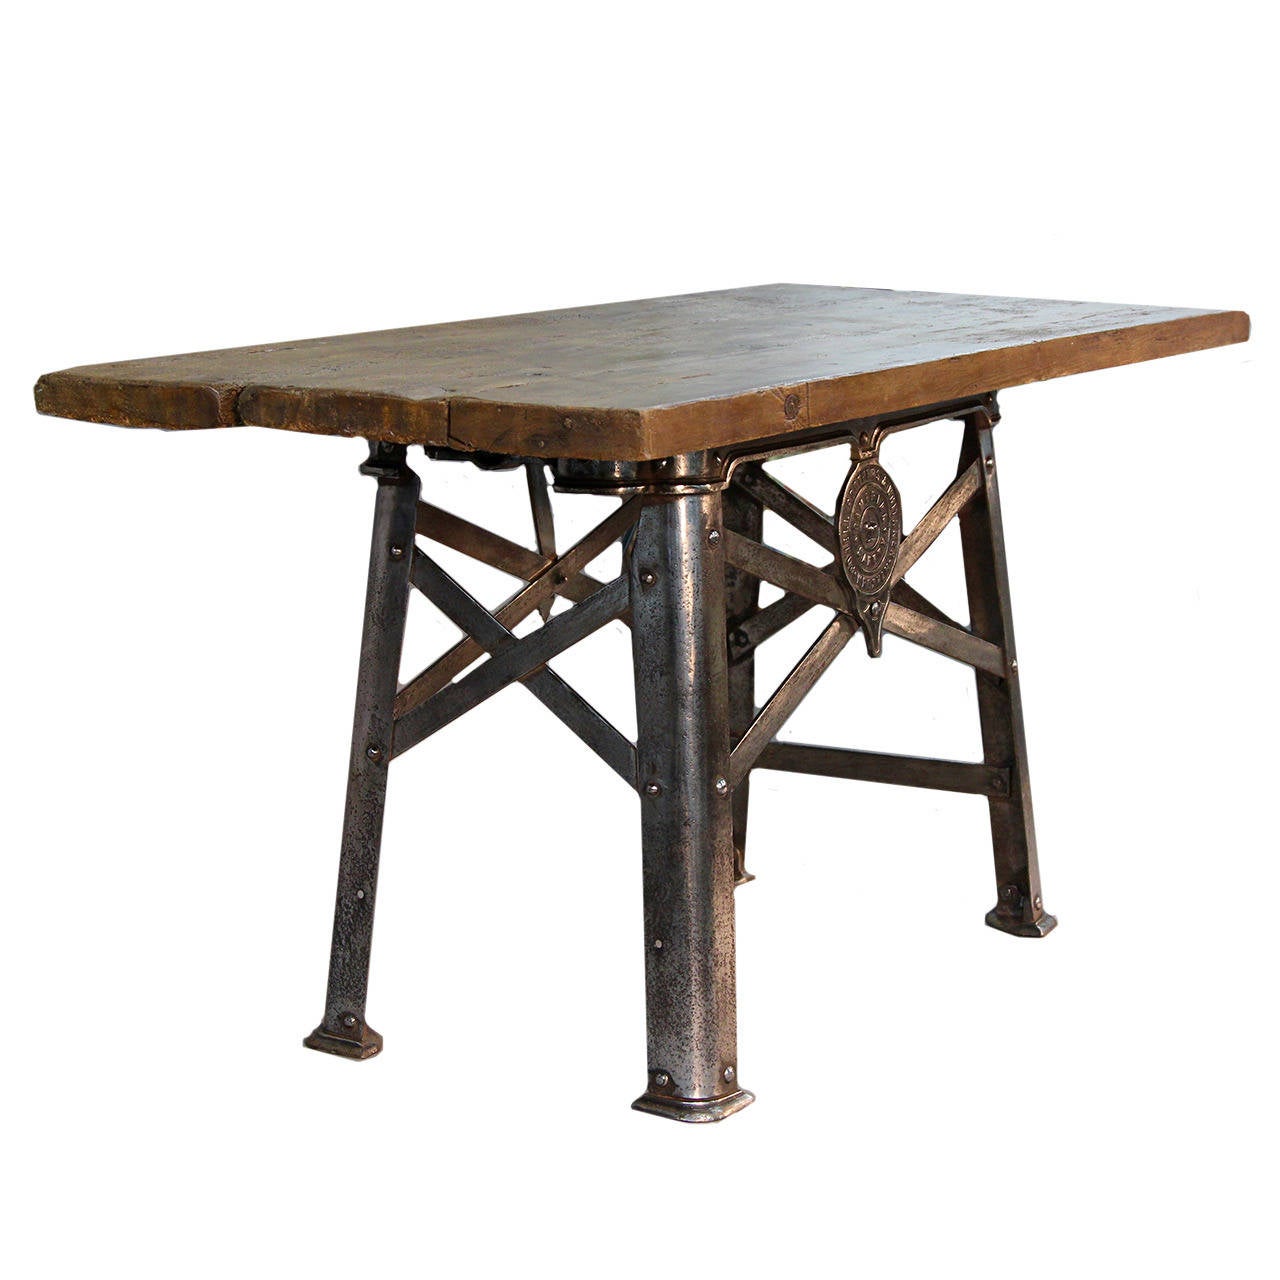 Rare English polished steel Industrial engineer's work bench/table/center island with wood top, circa 1890. #040-13